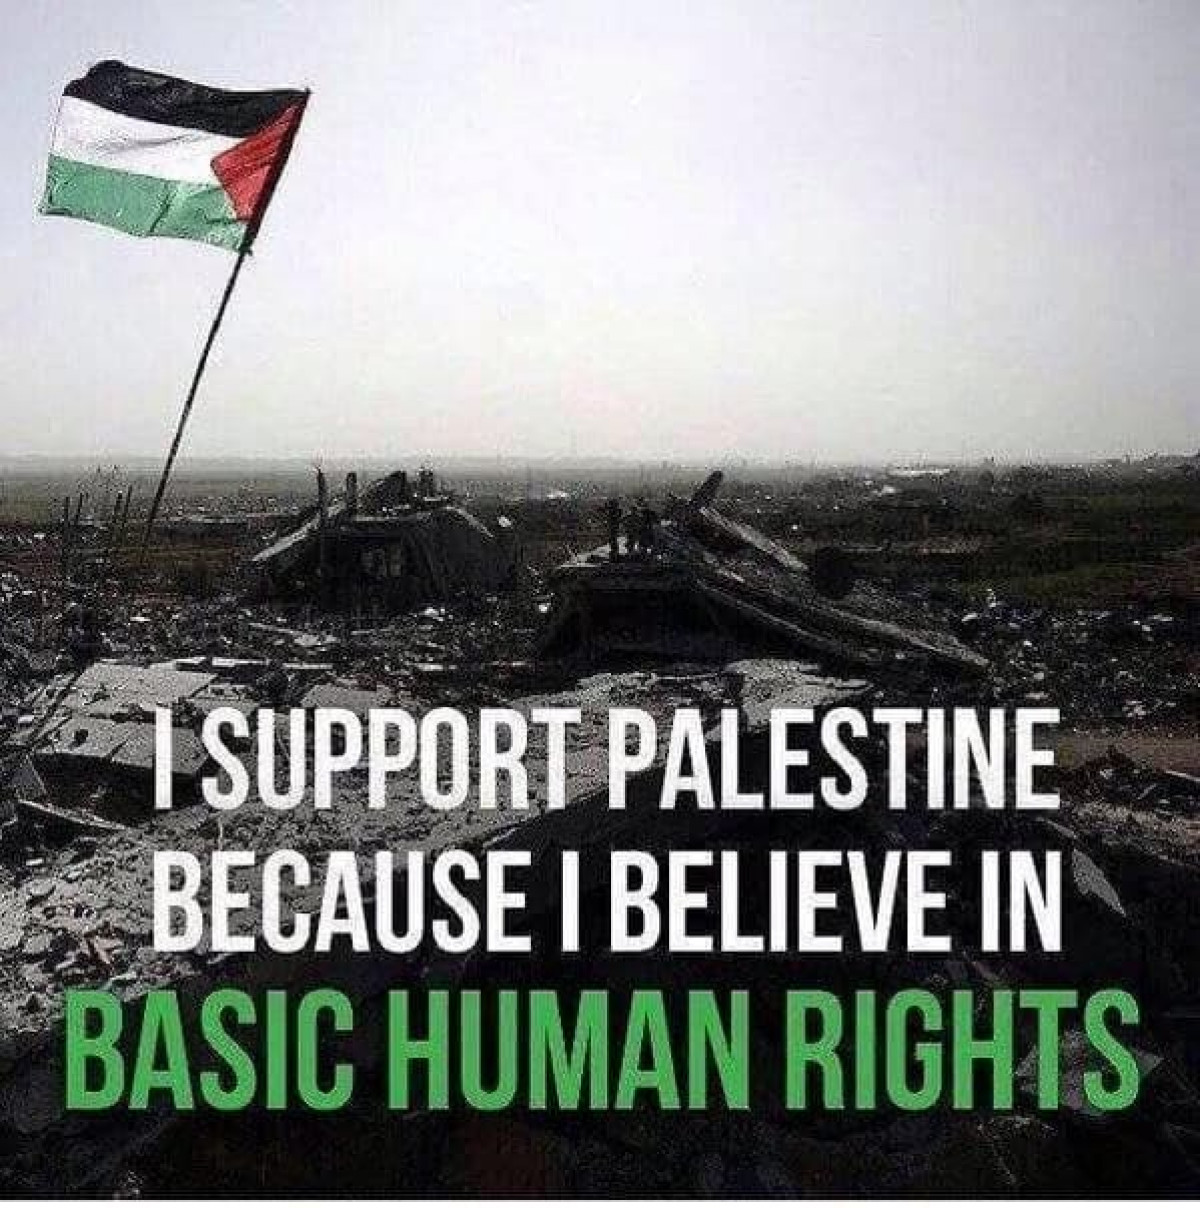 I support Palestine because I believe in Basic Human Rights